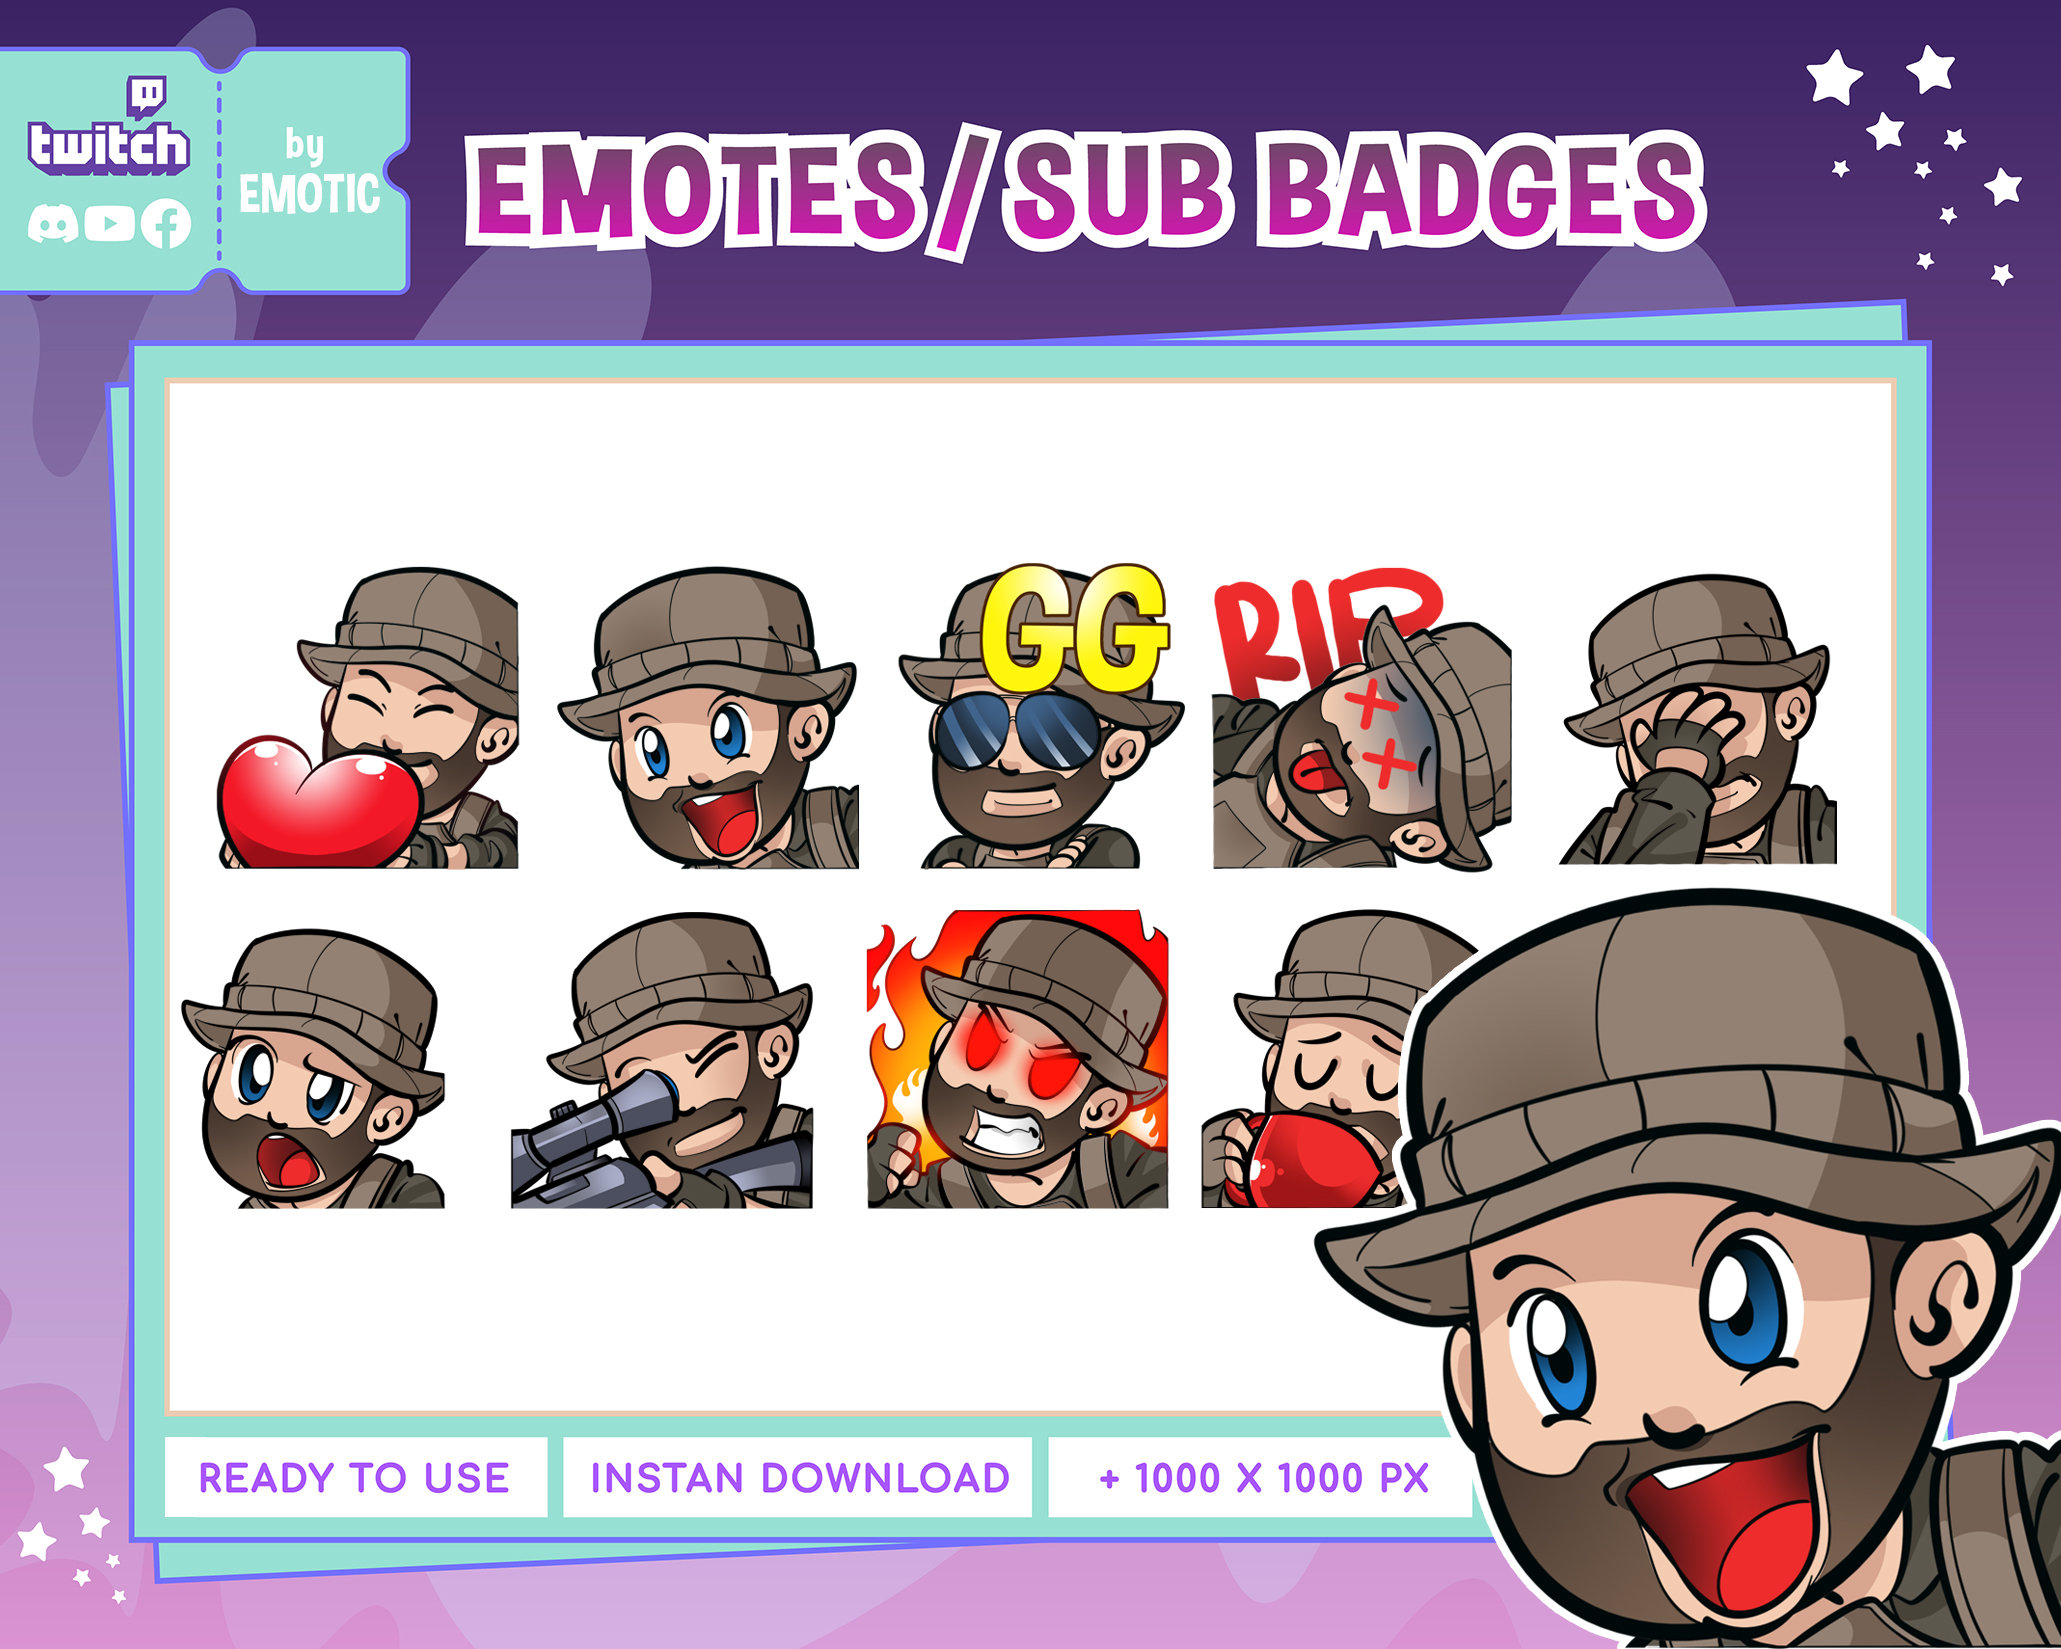 In-Game Emotes Menu - #407 by ForeverHD - Announcements